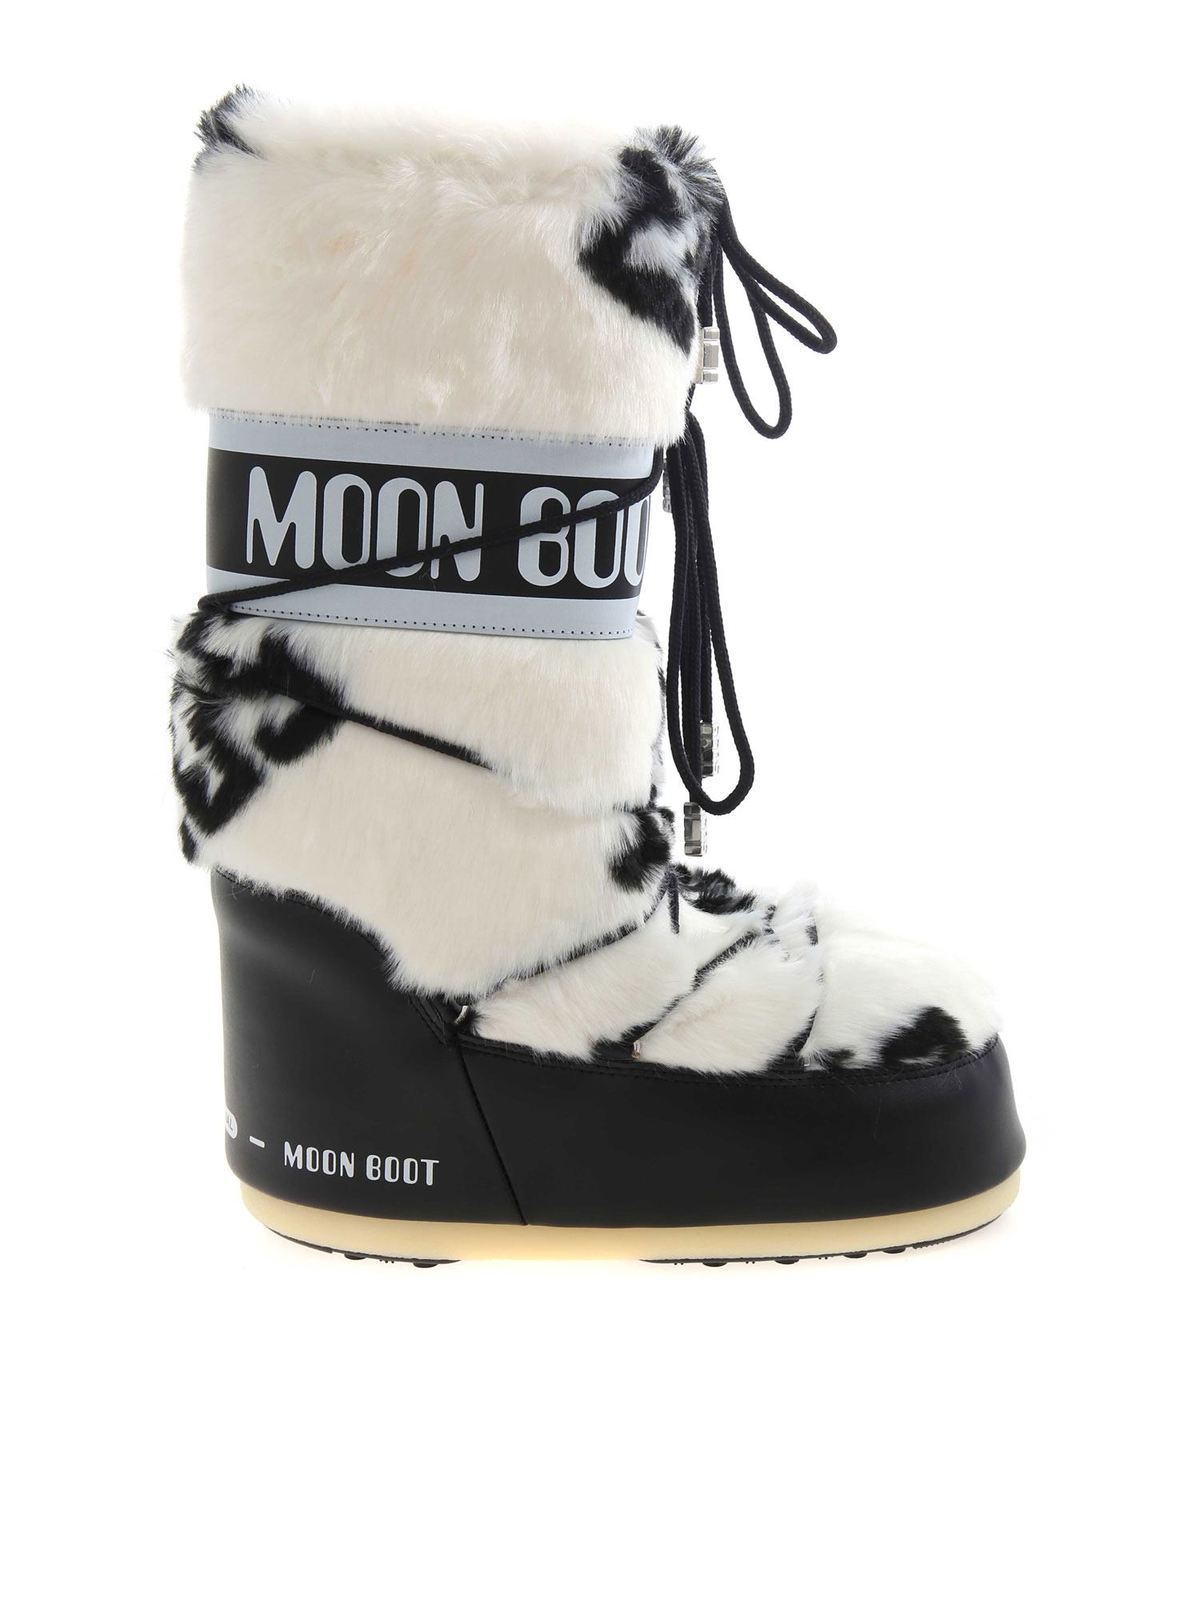 Boots Gcds - Synthetic fur Moon Boot in white and black - MB22U01003101